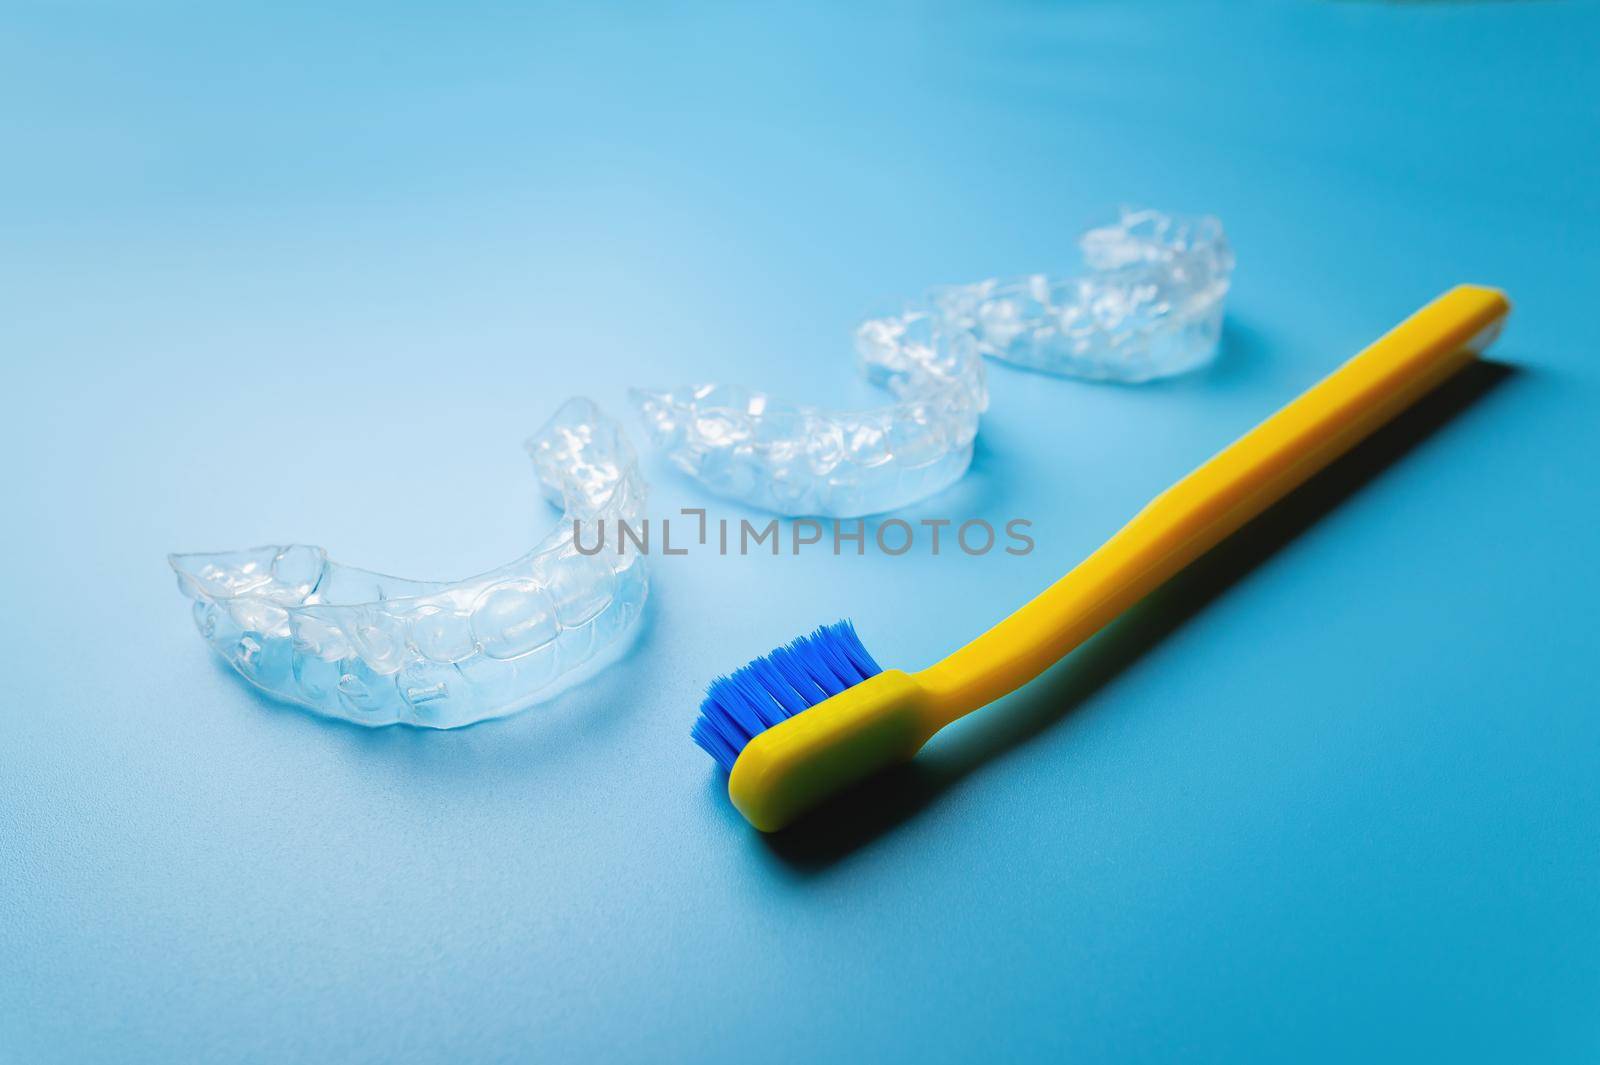 An invisible plastic aligner for correcting teeth to straighten teeth lies on a blue background with a toothbrush.